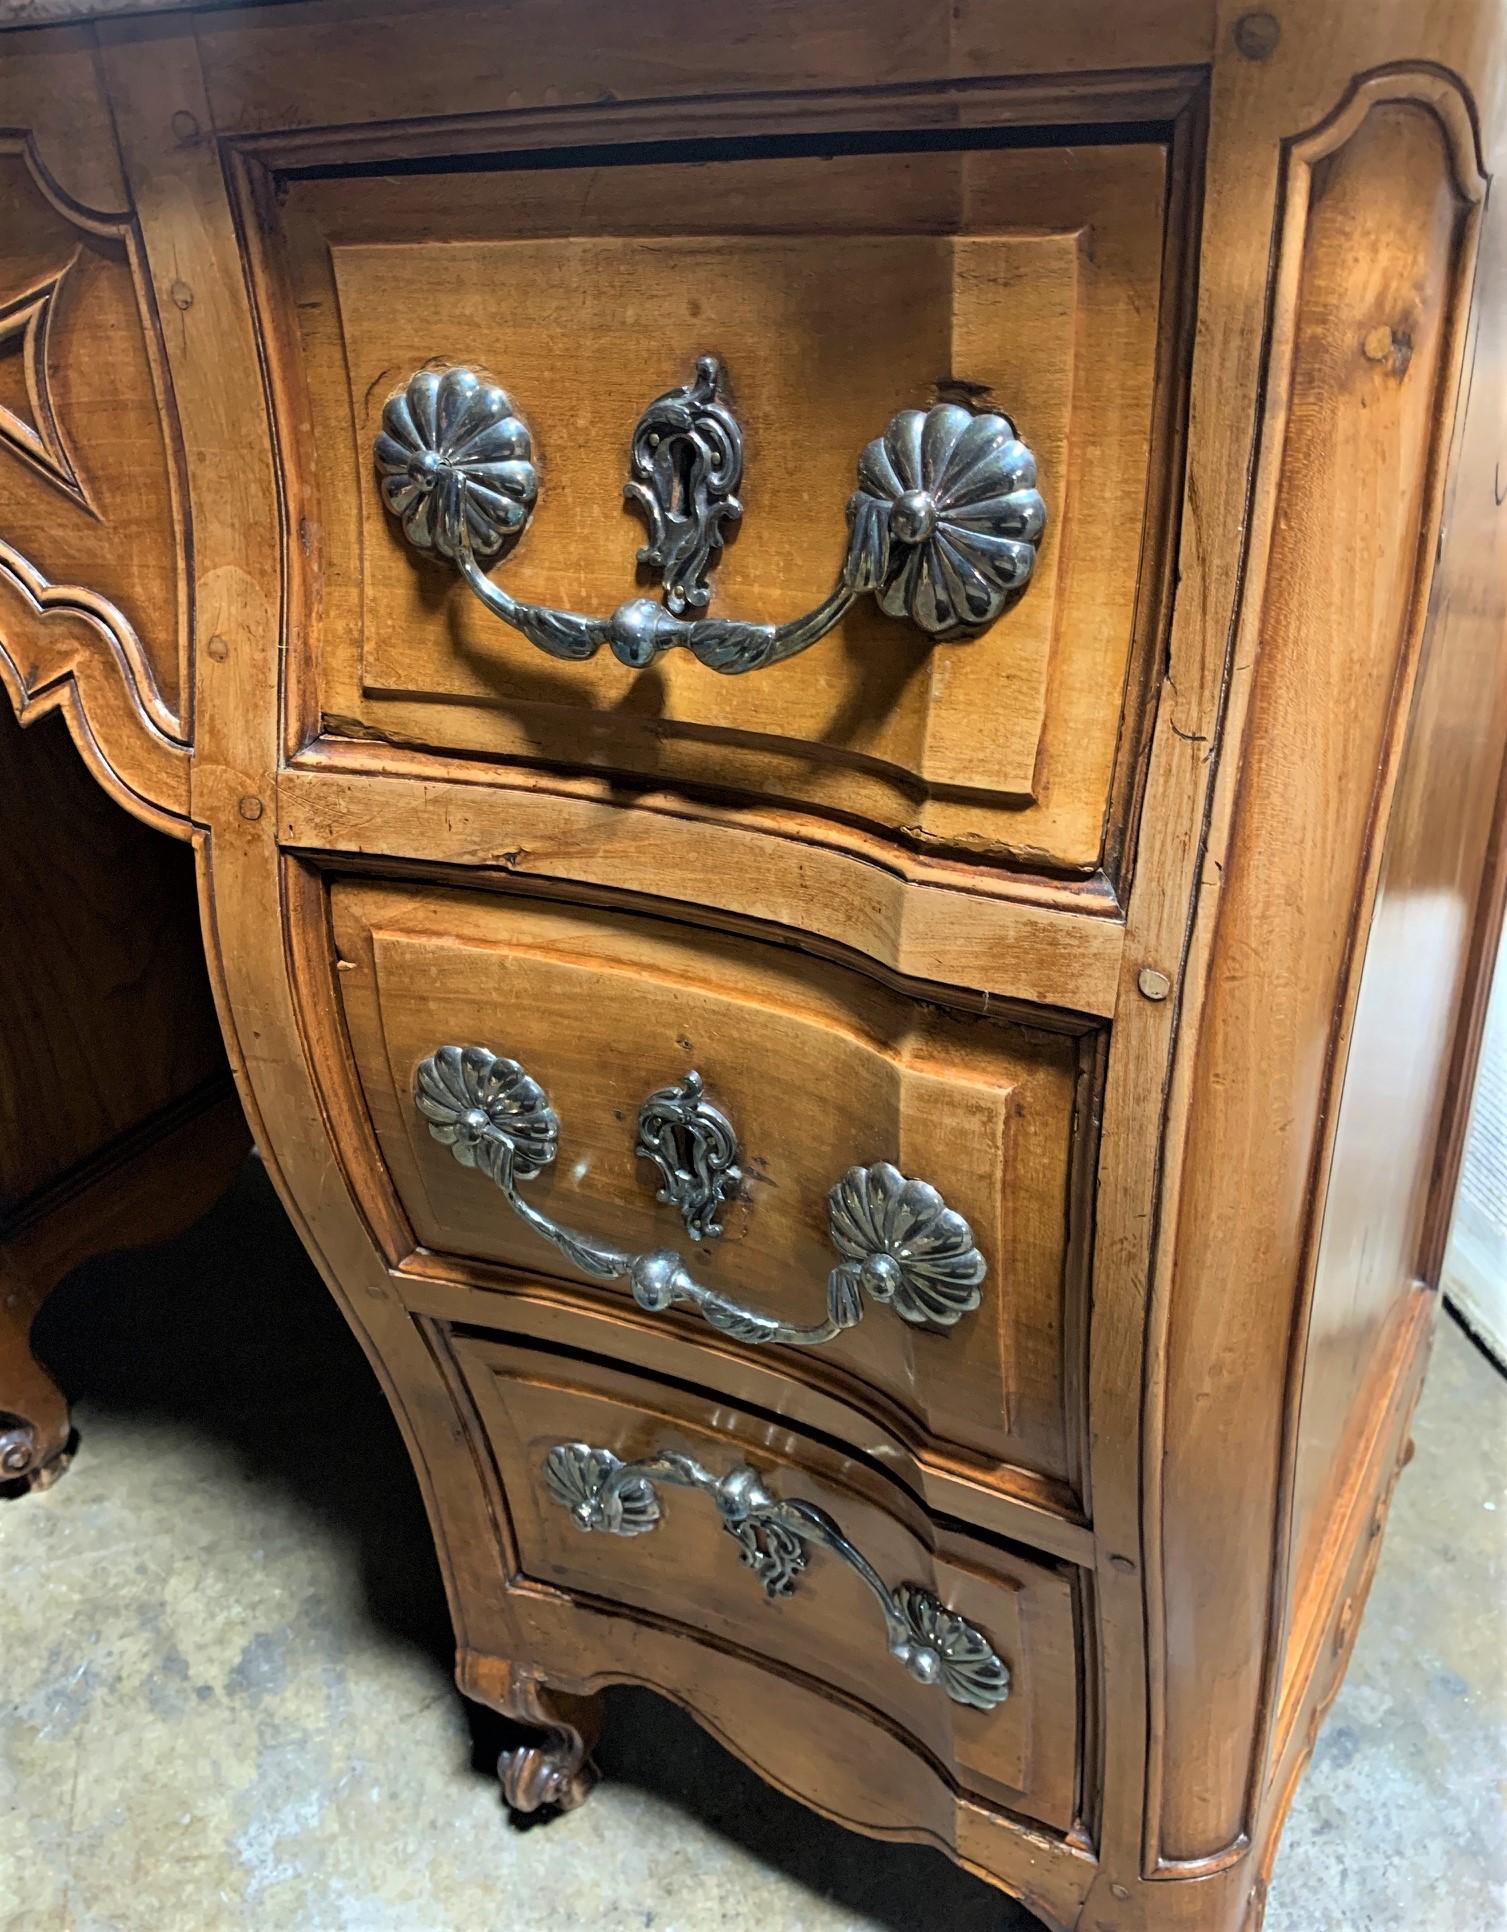 Outstanding 19th century French cherrywood and marble top serpentine fronted bathroom vanity of bombe form. The linen and silk lined drawers feature fancy polished steel pulls and escutcheons. The basin and faucets are possibly by Sherle Wagner. The